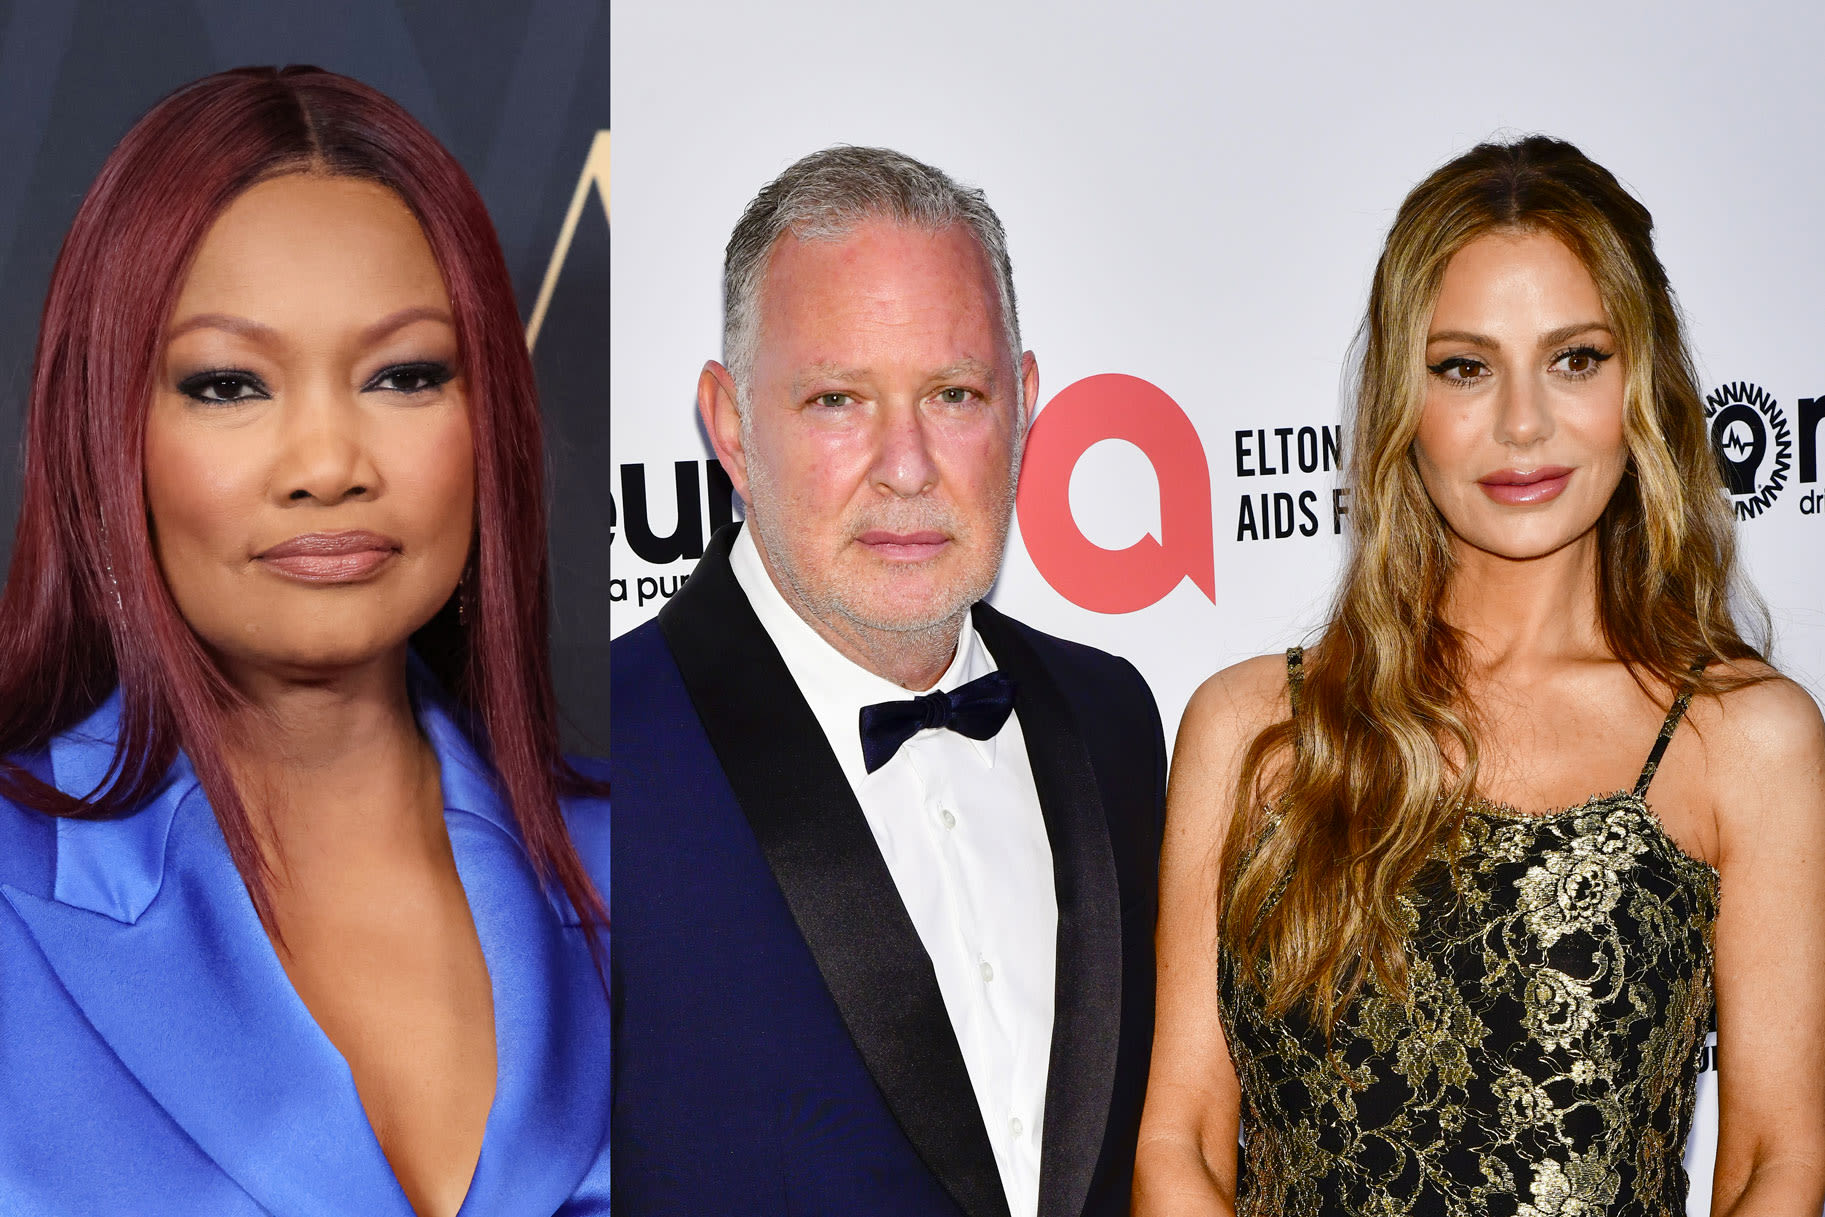 Garcelle Beauvais Weighs In on Dorit Kemsley's Split from PK: "I Just Hope..." | Bravo TV Official Site